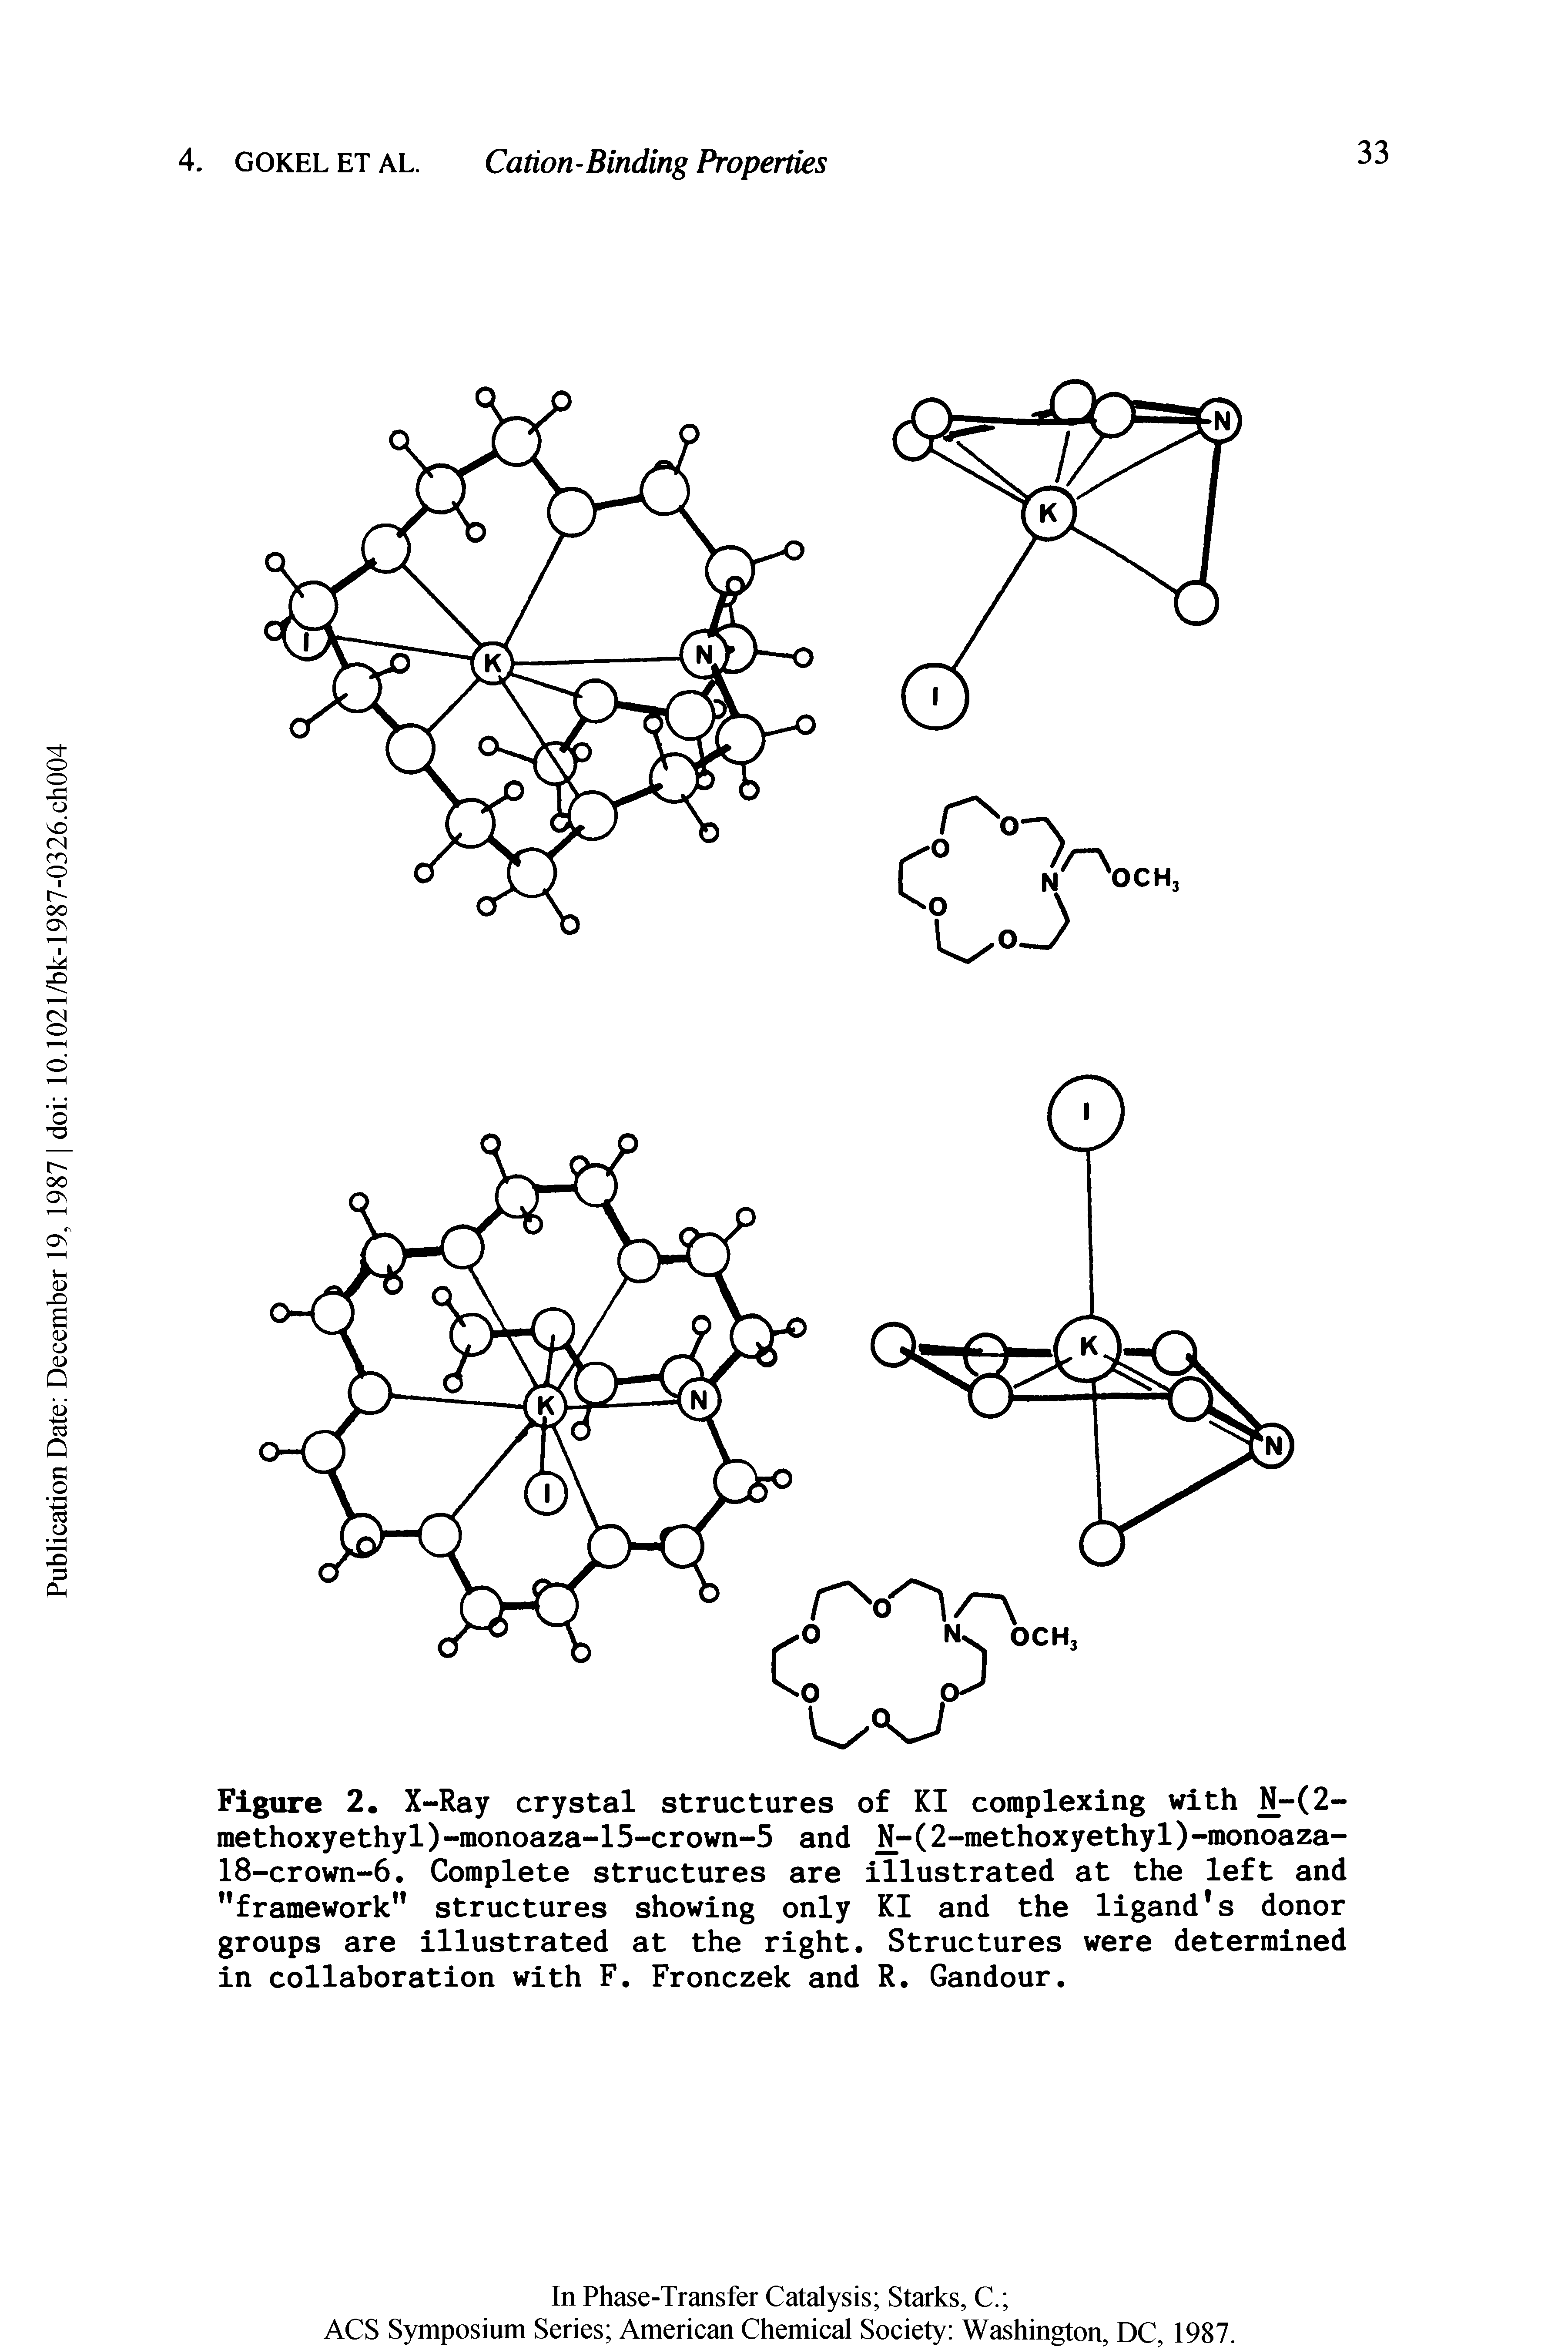 Figure 2. X-Ray crystal structures of KI complexing with N7(2-methoxyethyl)-monoaza-15-crown-5 and (2-methoxyethy1)-monoaza-18-crown-6. Complete structures are illustrated at the left and "framework structures showing only KI and the ligand s donor groups are illustrated at the right. Structures were determined in collaboration with F. Fronczek and R. Candour.